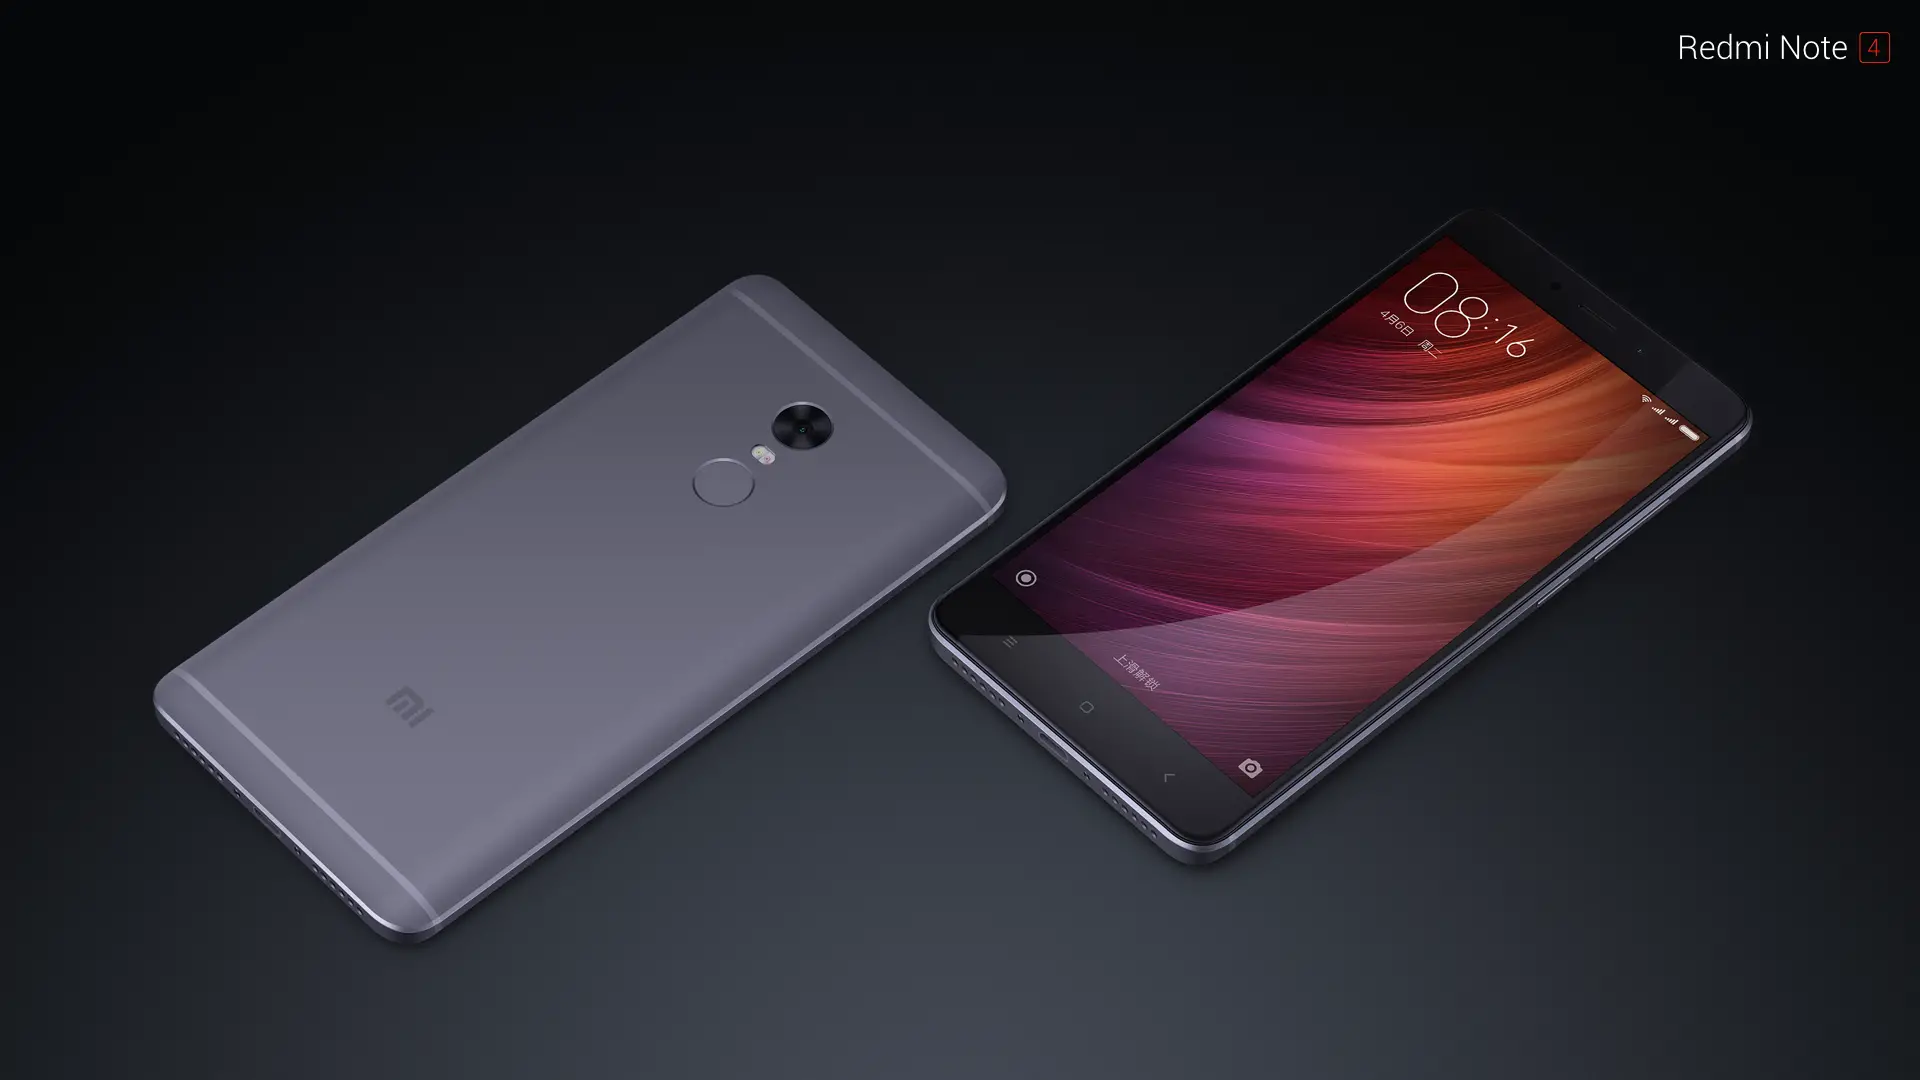 Gangster die Plague Xiaomi shows off the Redmi Note 4 with its 4,100mAh battery and priced at  just $135 – Phandroid